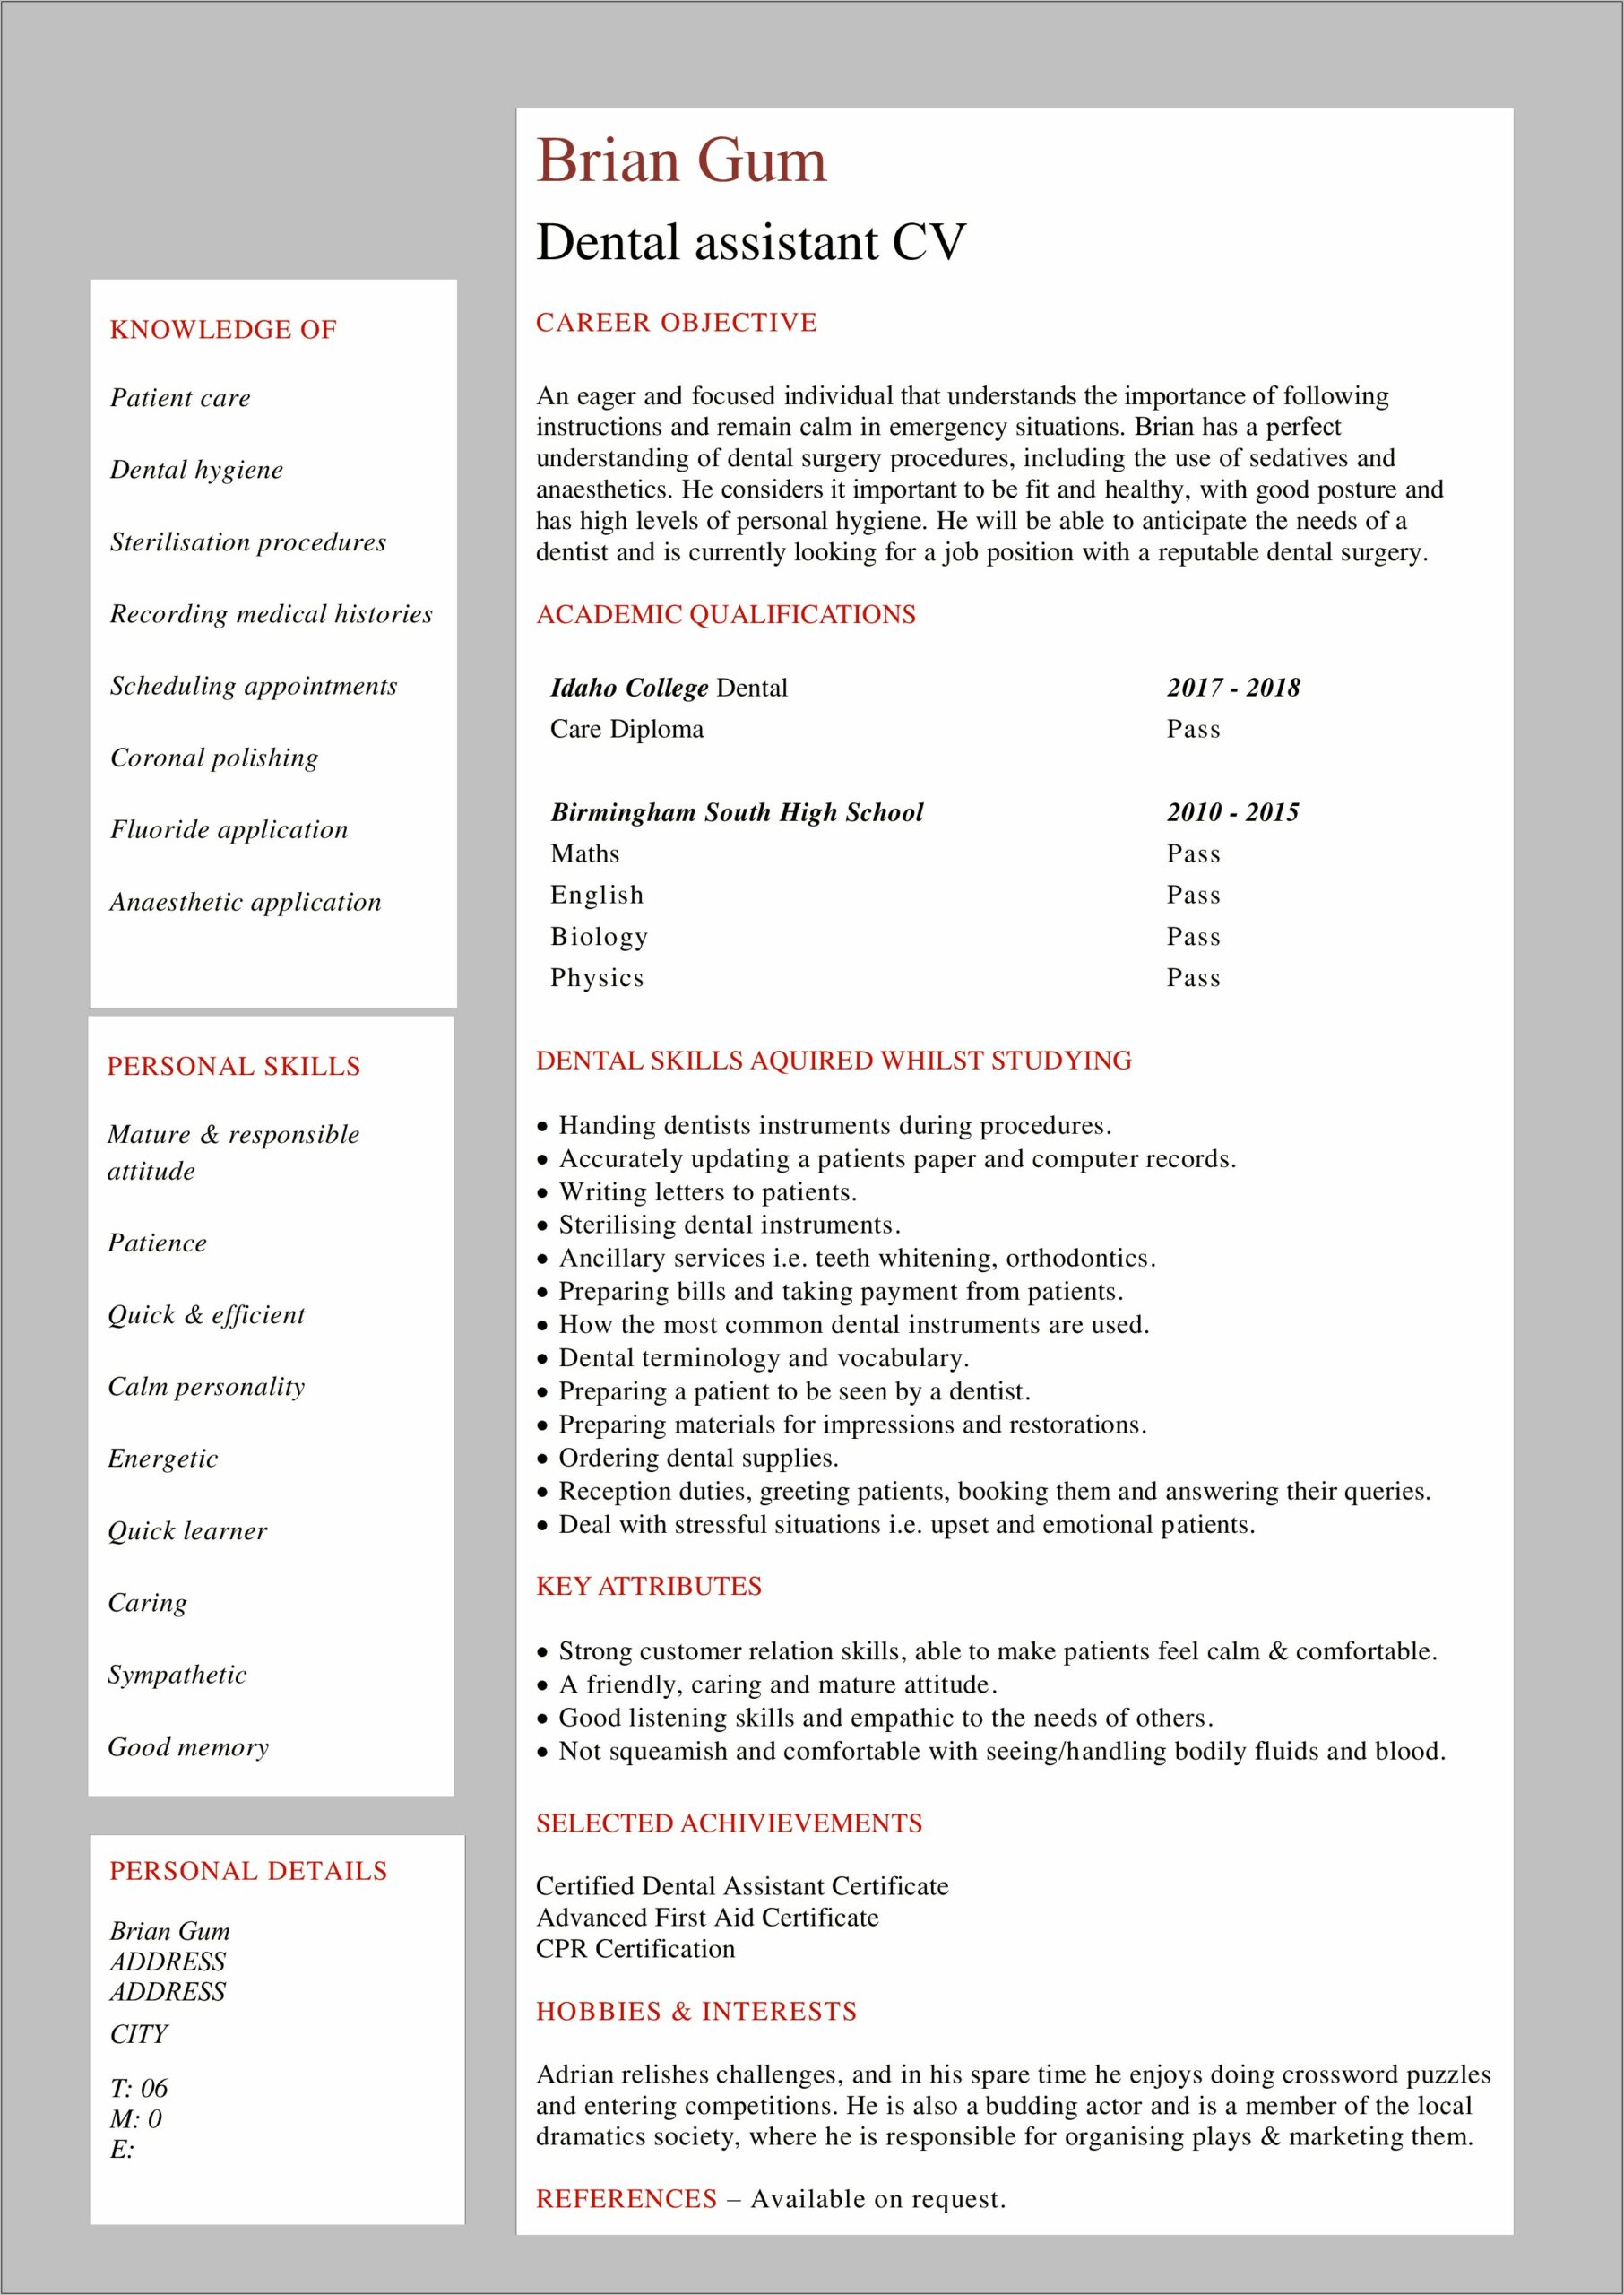 Resume For Student Just Graduating From Dental School